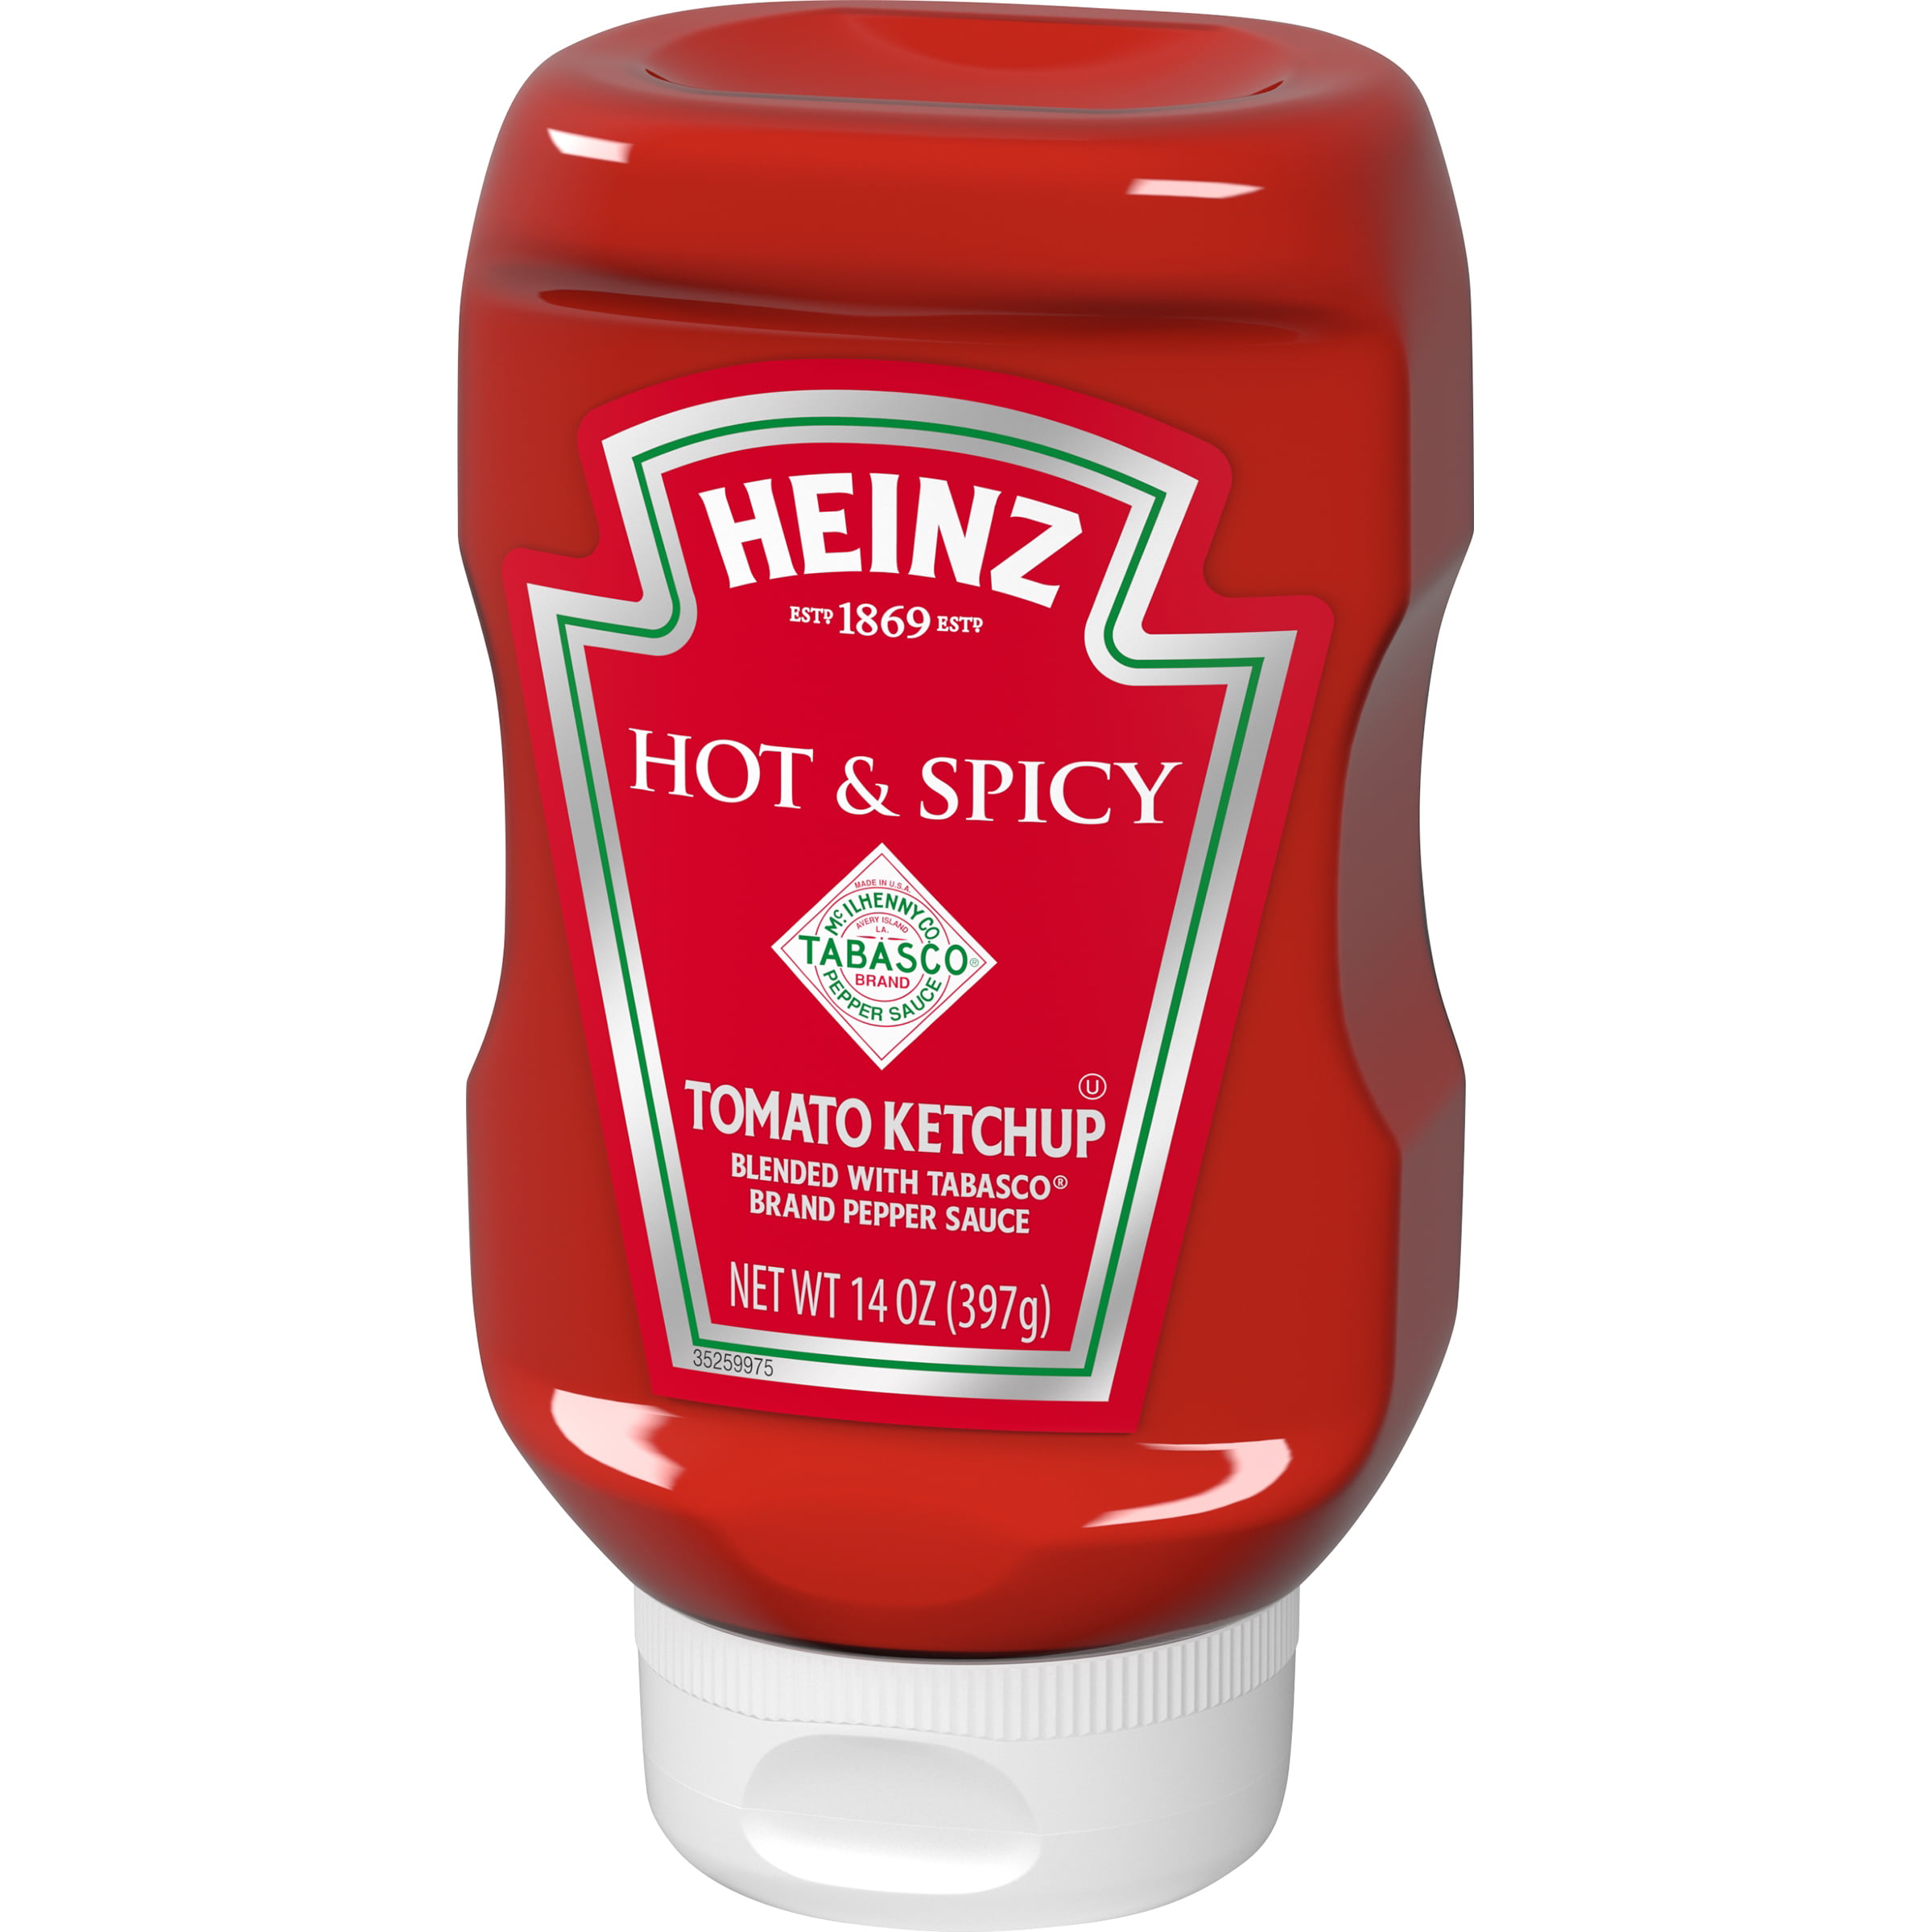 Heinz Hot Spicy Tomato Ketchup 14 oz. Squeeze Bottle | eBay